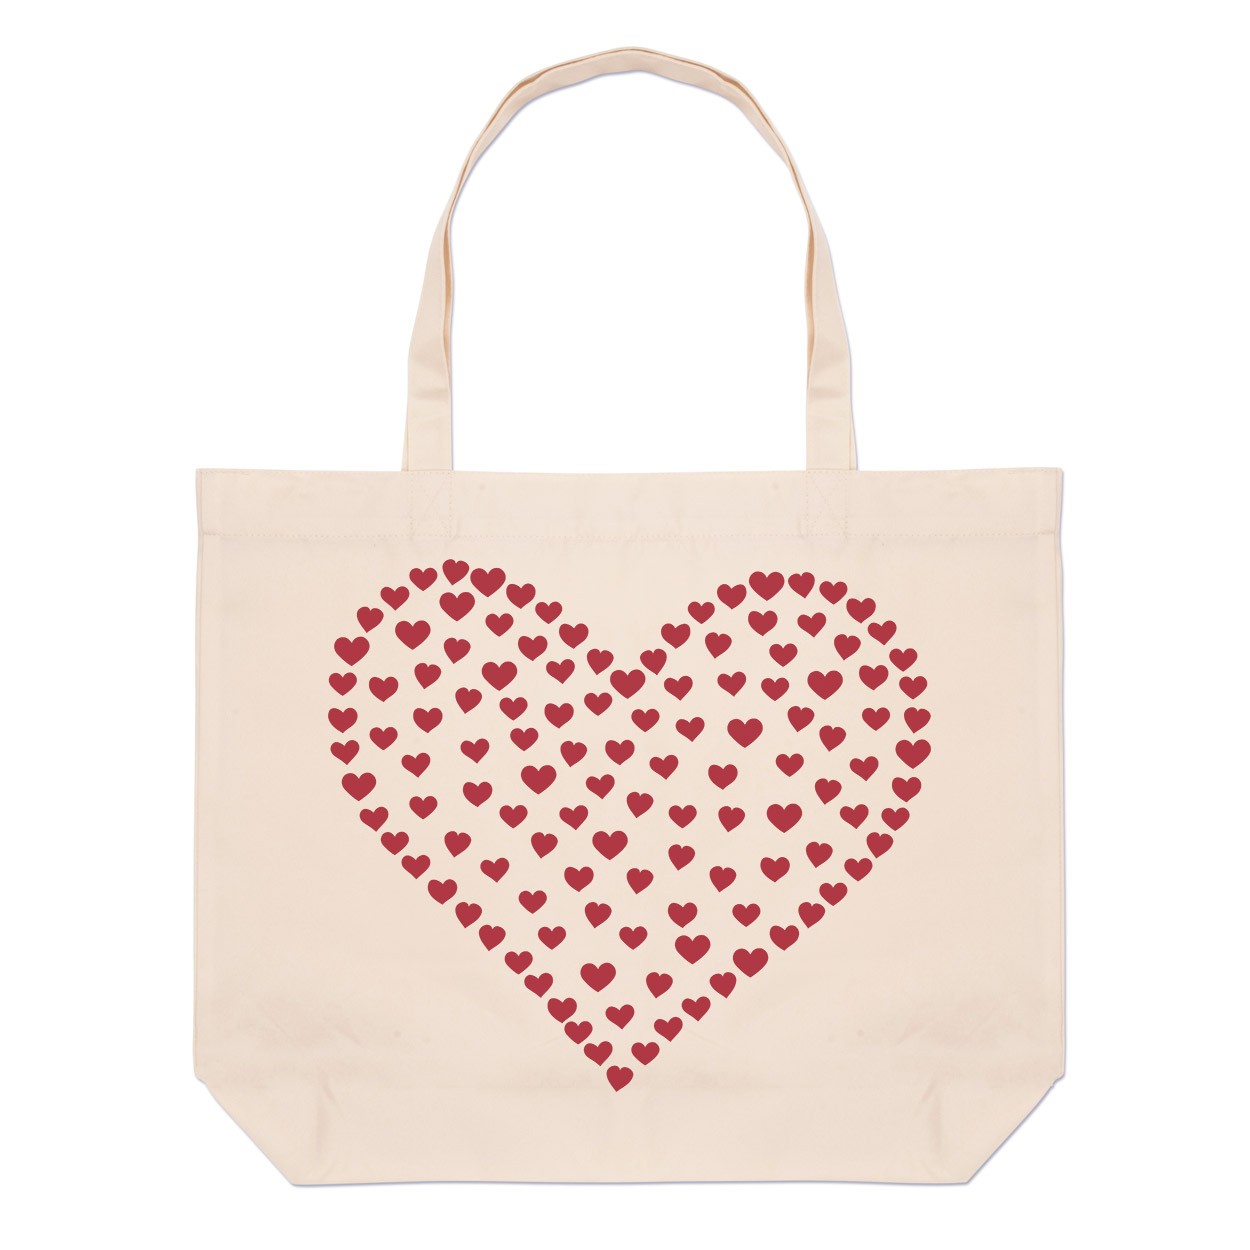 Heart Of Hearts Large Beach Tote Bag